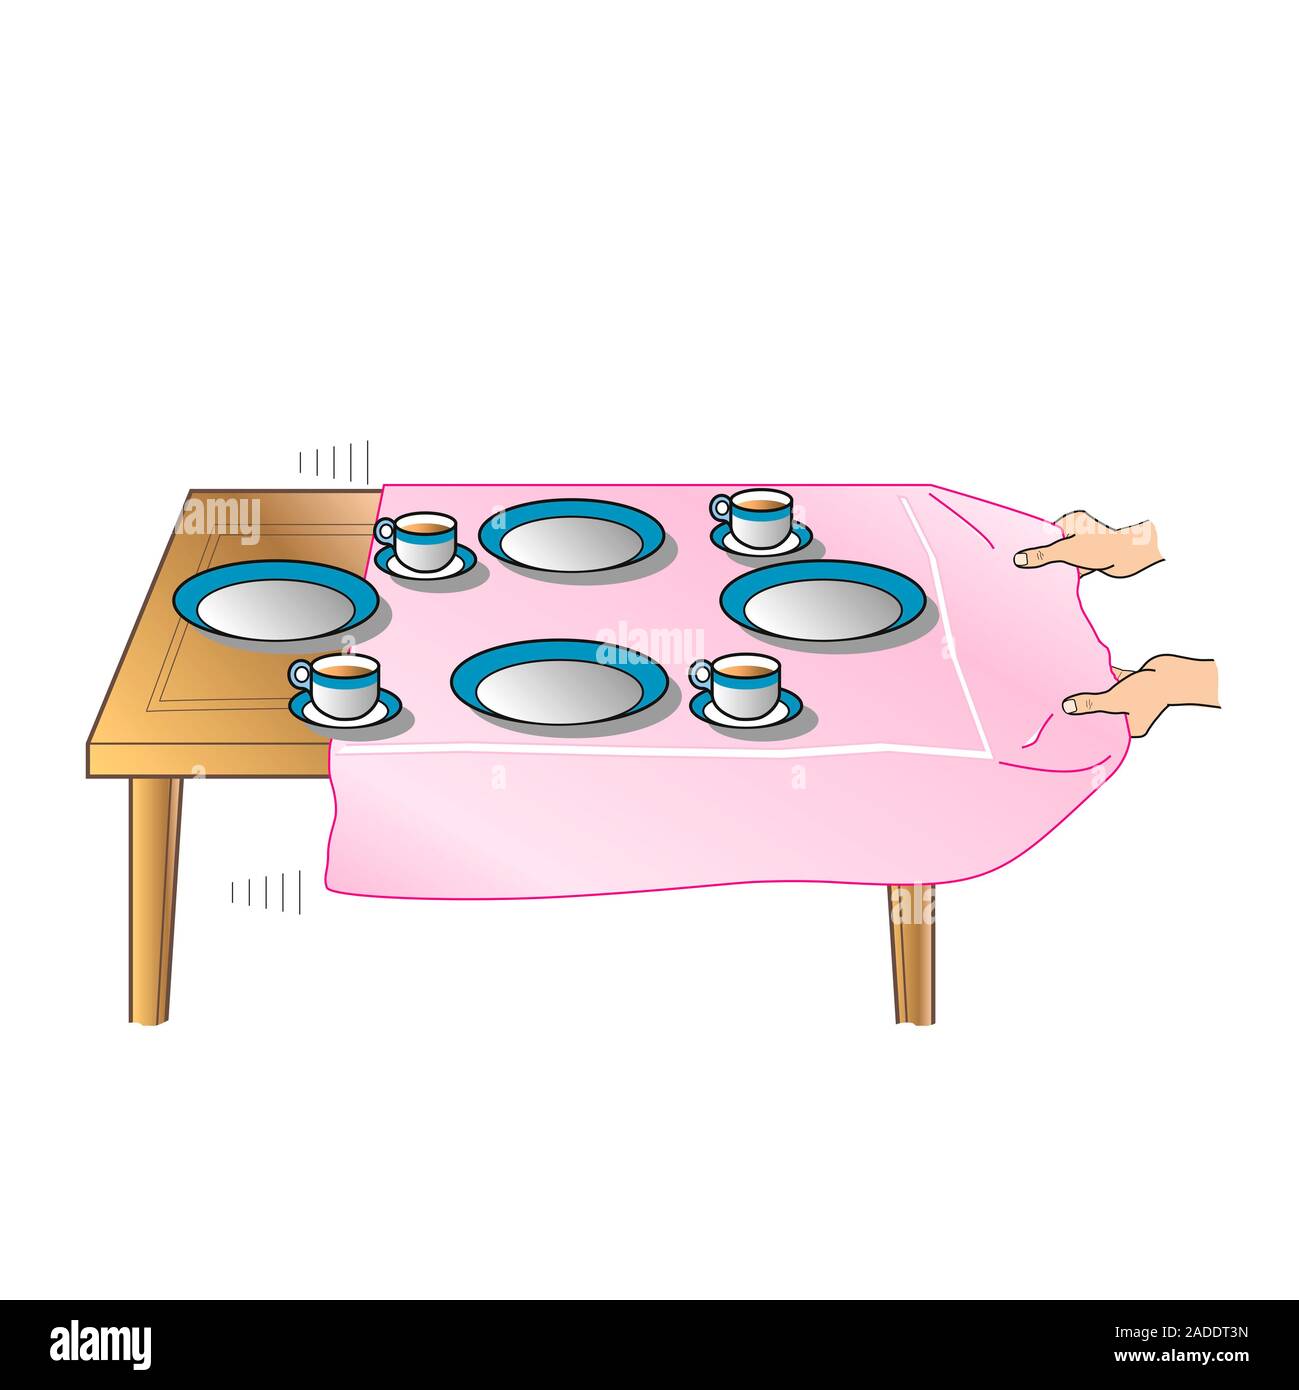 https://c8.alamy.com/comp/2ADDT3N/tablecloth-trick-illustration-if-the-crockery-is-heavy-enough-rapidly-pulling-off-the-tablecloth-can-leave-the-plates-and-cups-on-the-table-withou-2ADDT3N.jpg